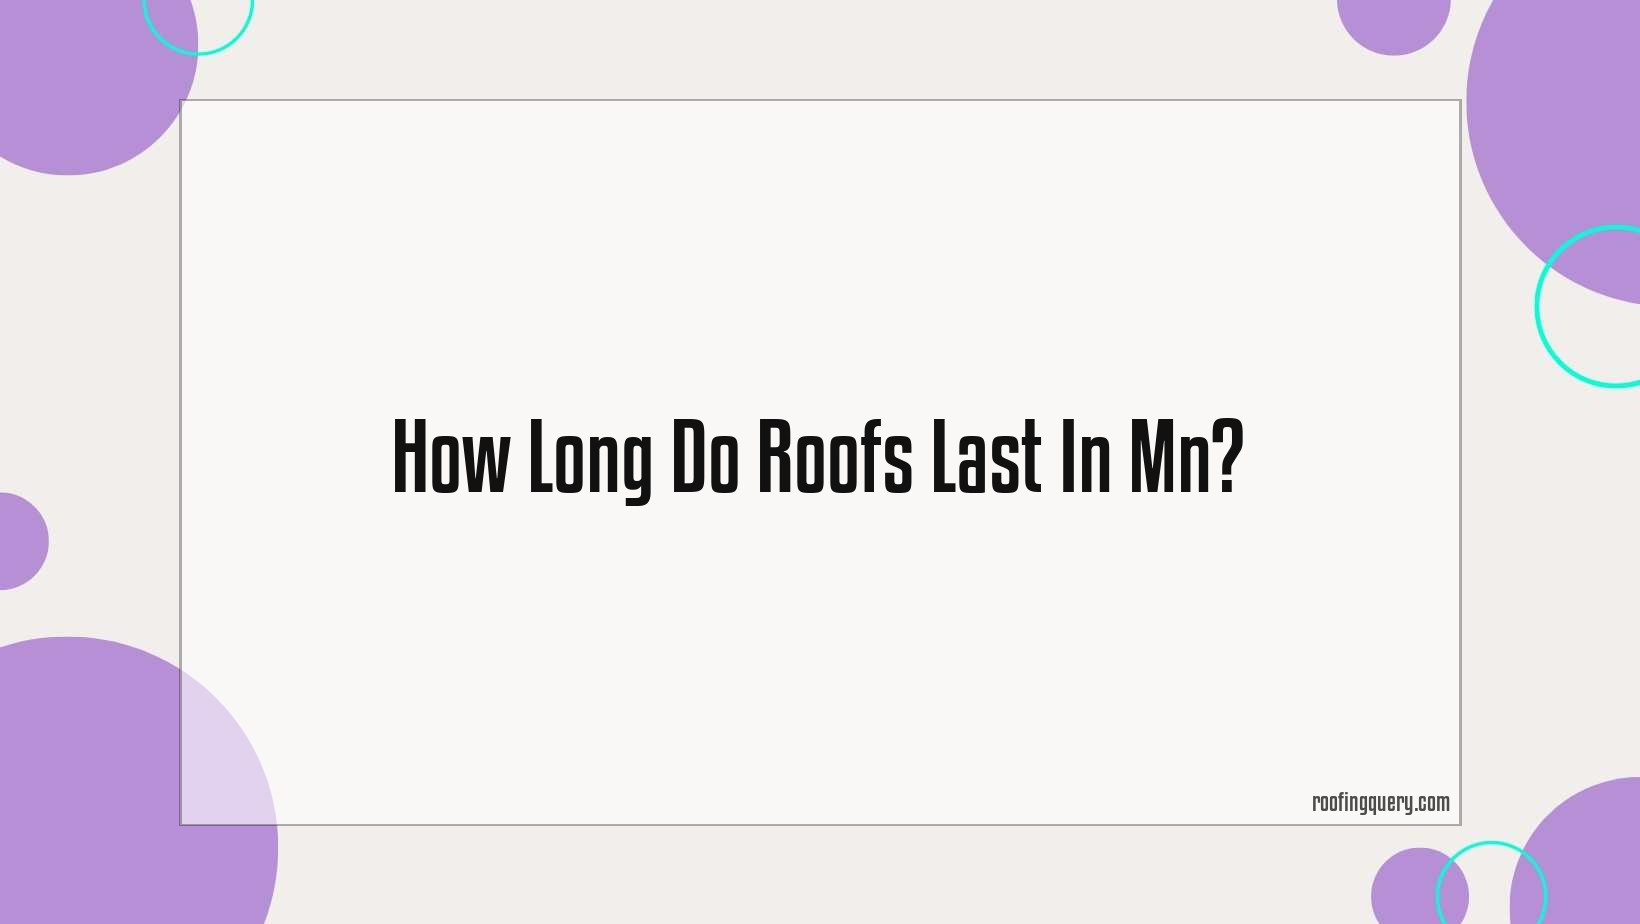 How Long Do Roofs Last In Mn?